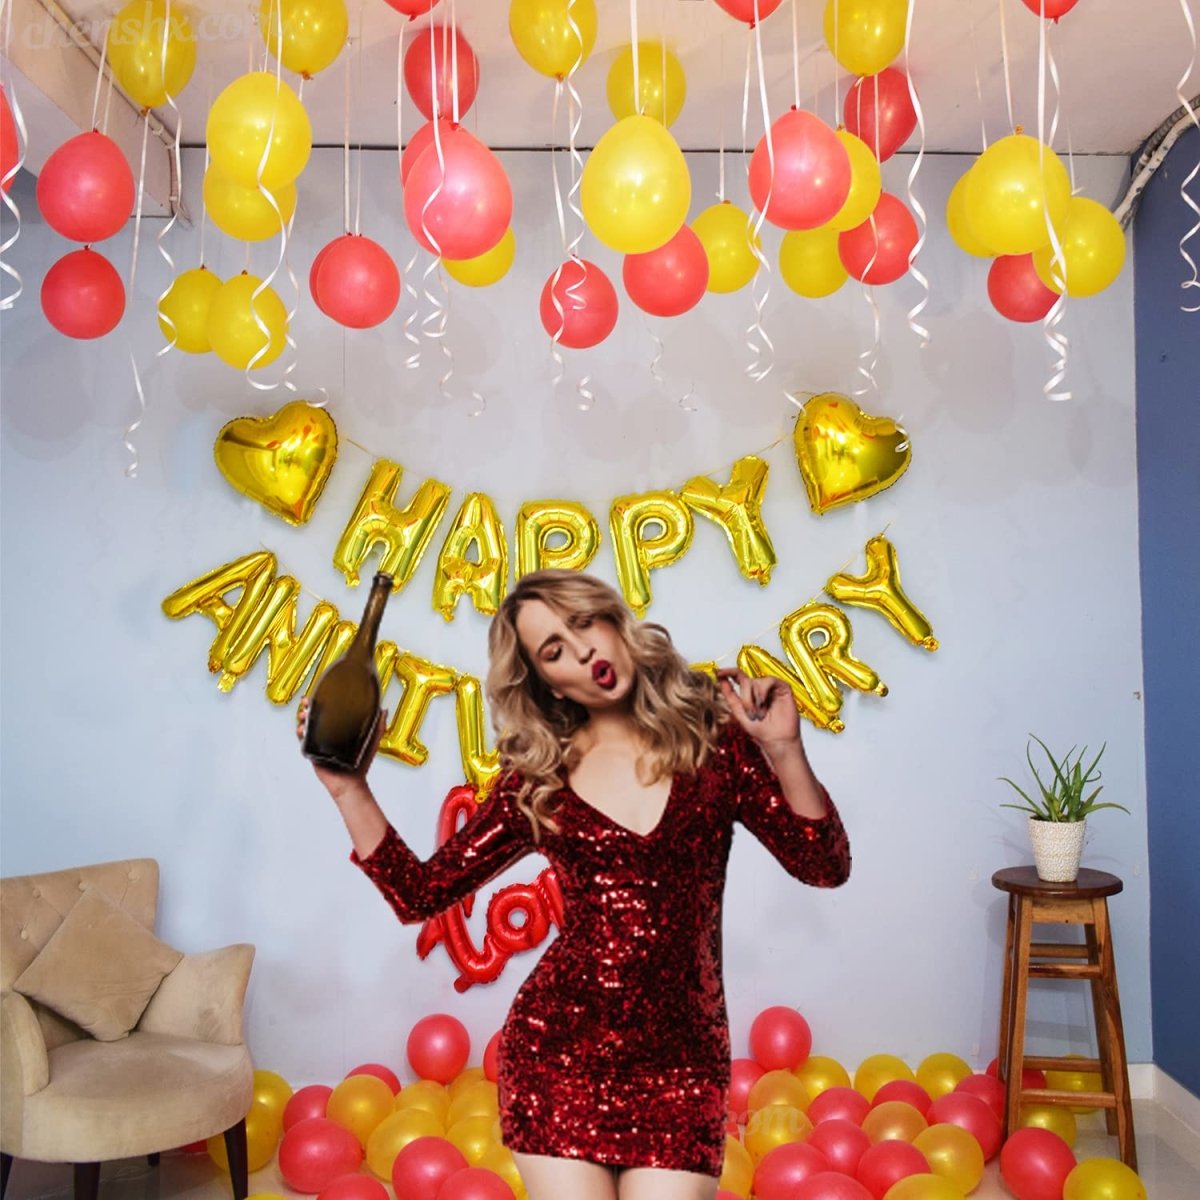 Red & Yellow Anniversary Decoration For Home or Bedroom - 60Pcs - Golden Anniversary Foil, Cursive Love Foil, Heart Foil & Latex Balloons - Marriage Decoration Set - Husband or Wife freeshipping - CherishX Partystore